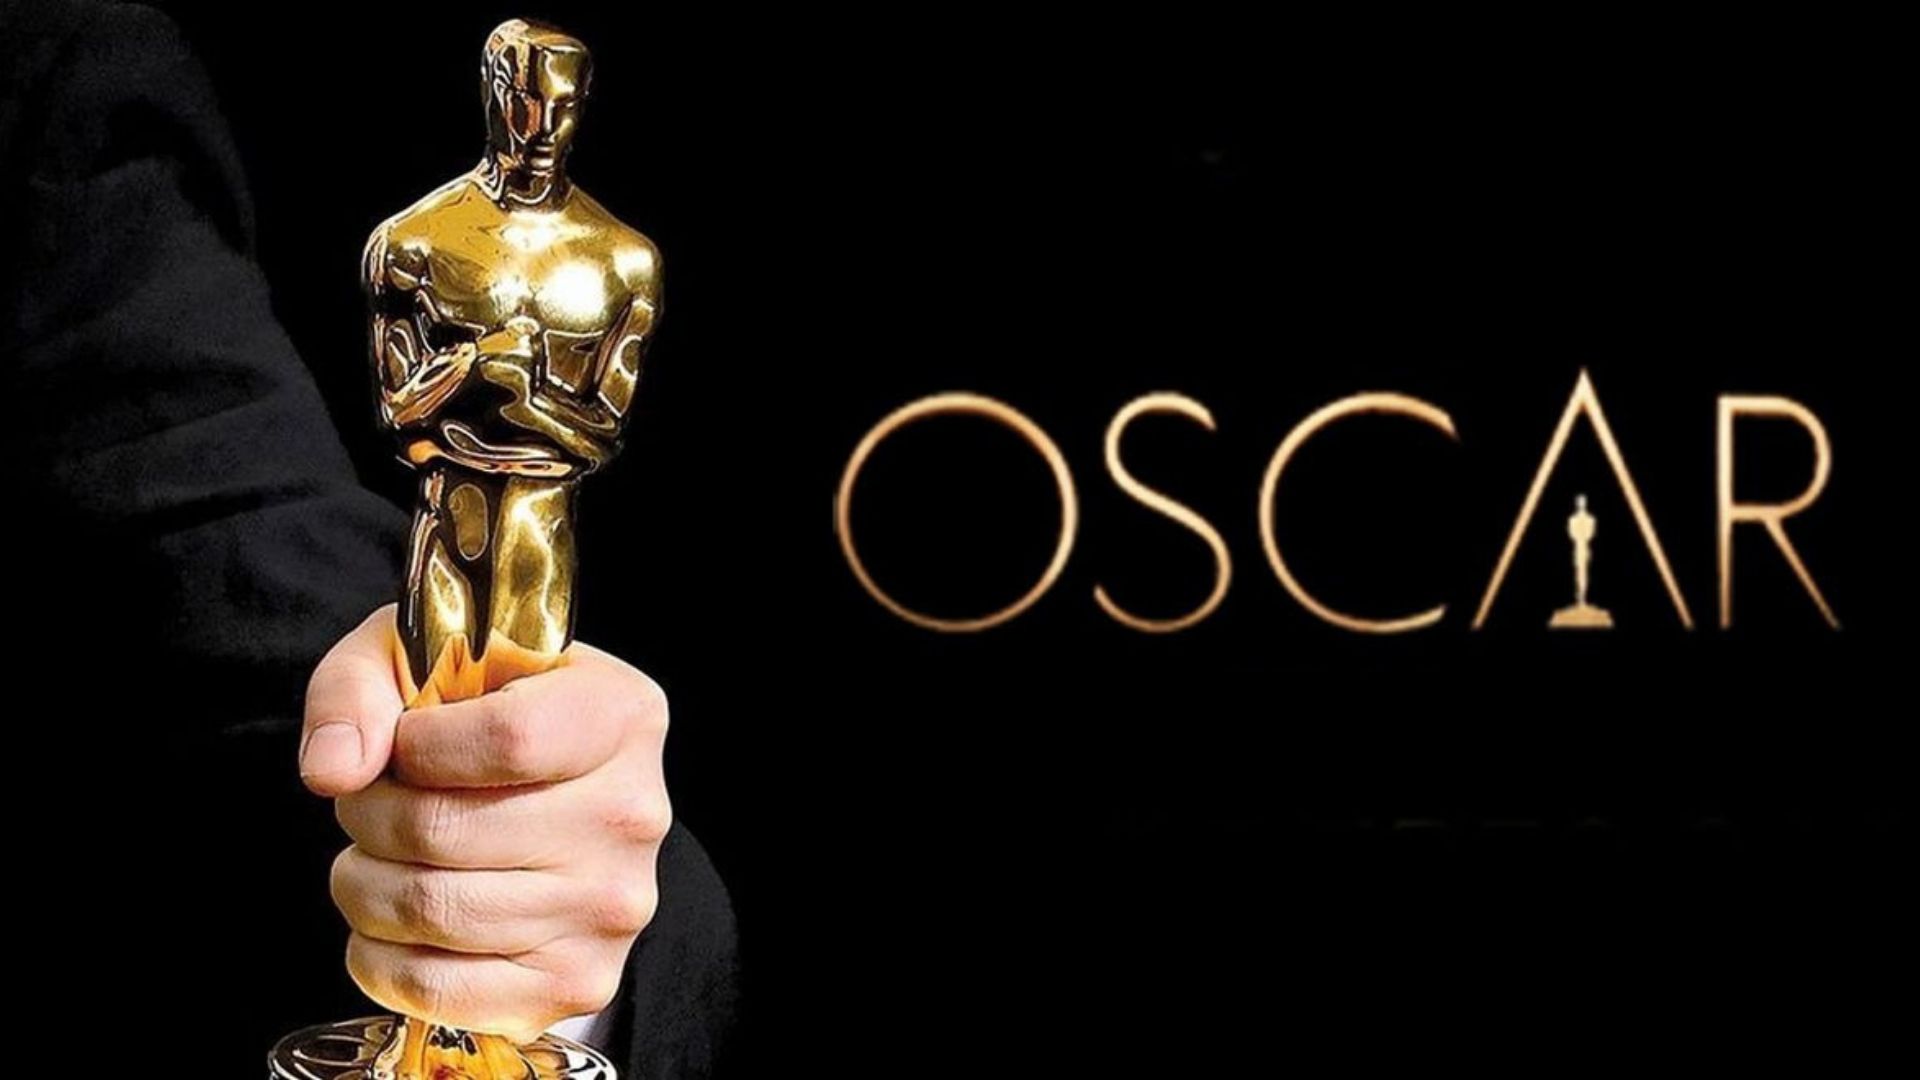 Oscars to again allow movies on streaming platforms to compete for honors, Amazon brings James Bond, Rocky to fight Netflix with $8.5 bln MGM buy, and other top news.